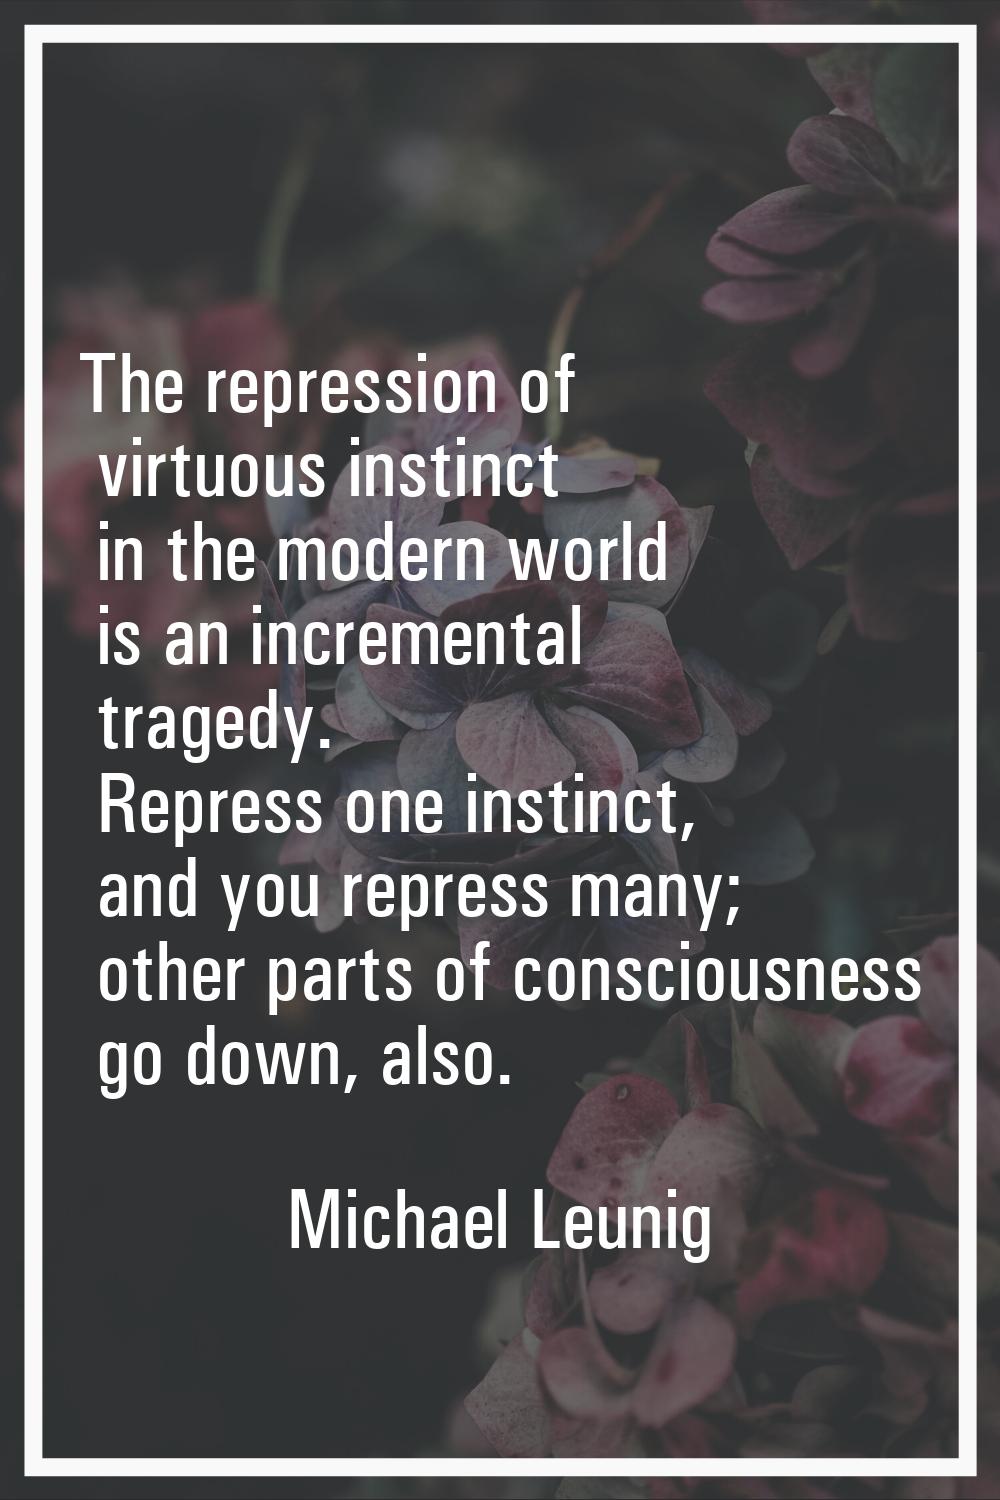 The repression of virtuous instinct in the modern world is an incremental tragedy. Repress one inst